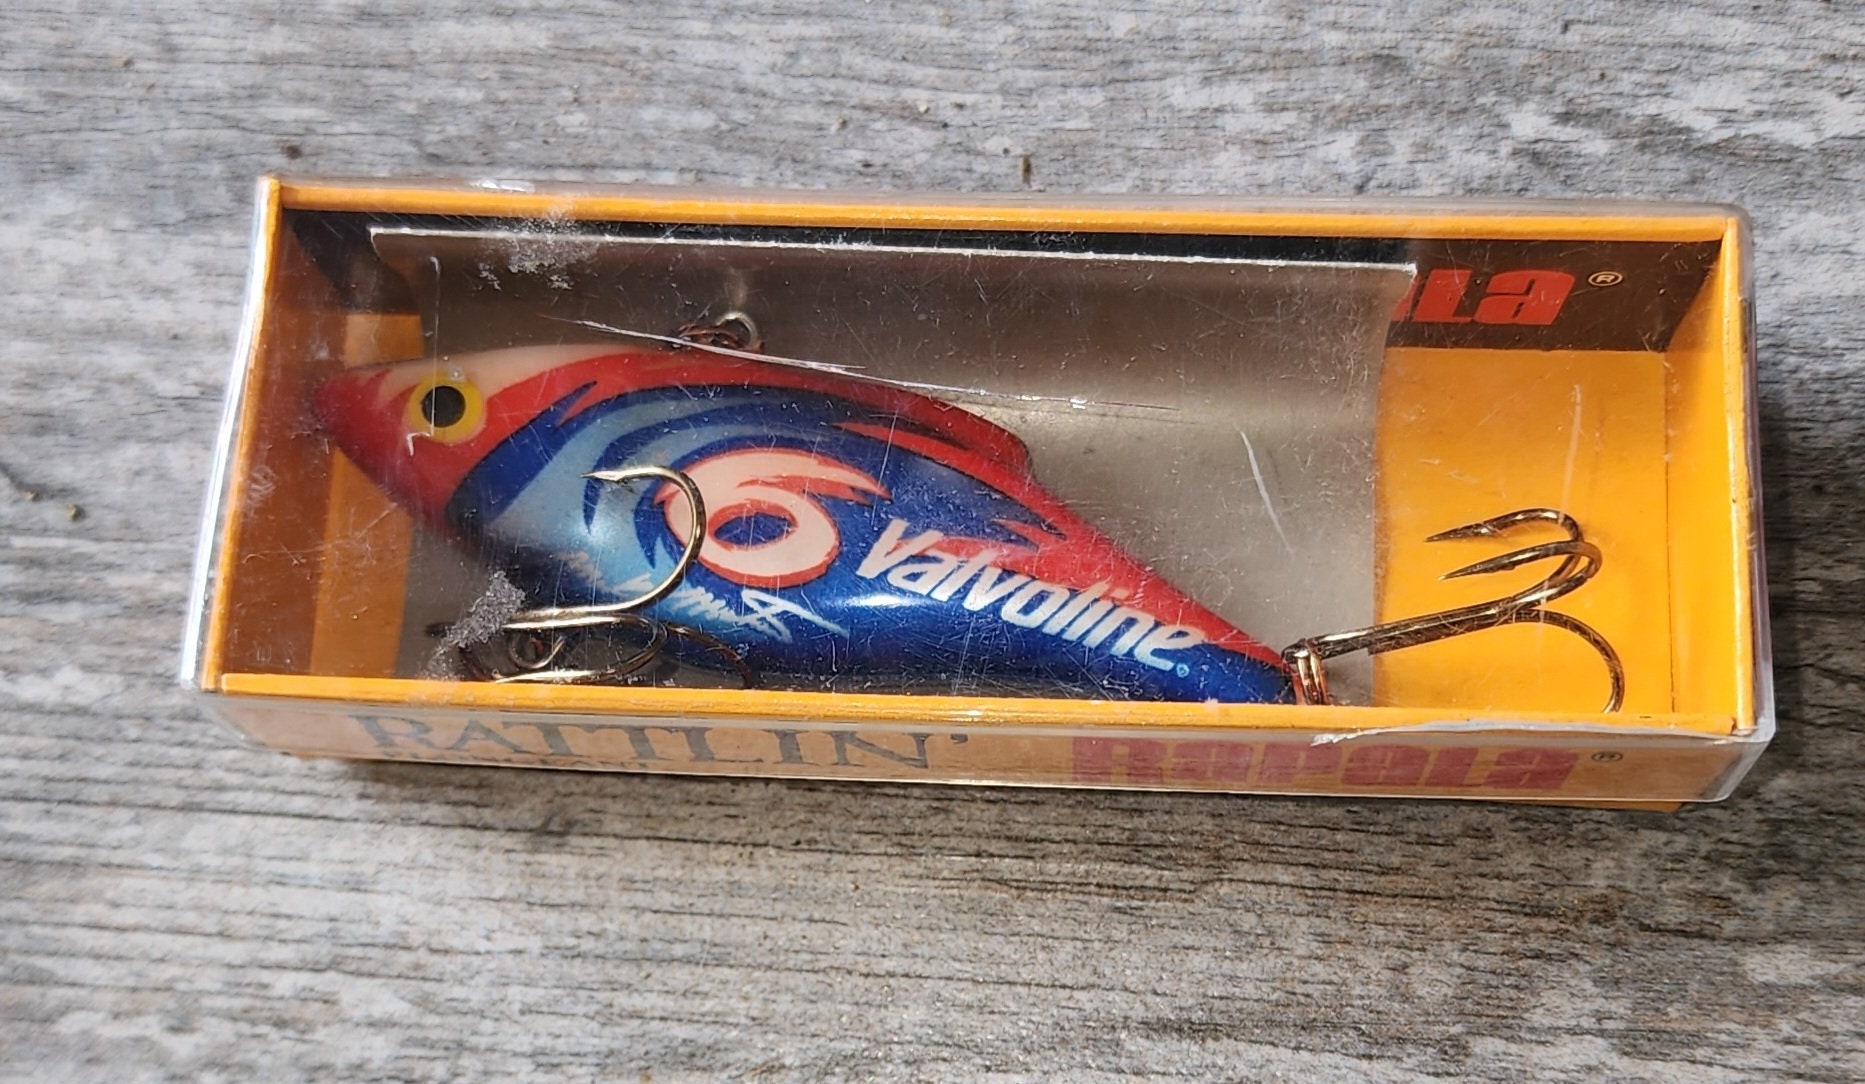 VALVOLINE FISHING LURE rattlin rapala blue red and silver multi hook never  used never out of box